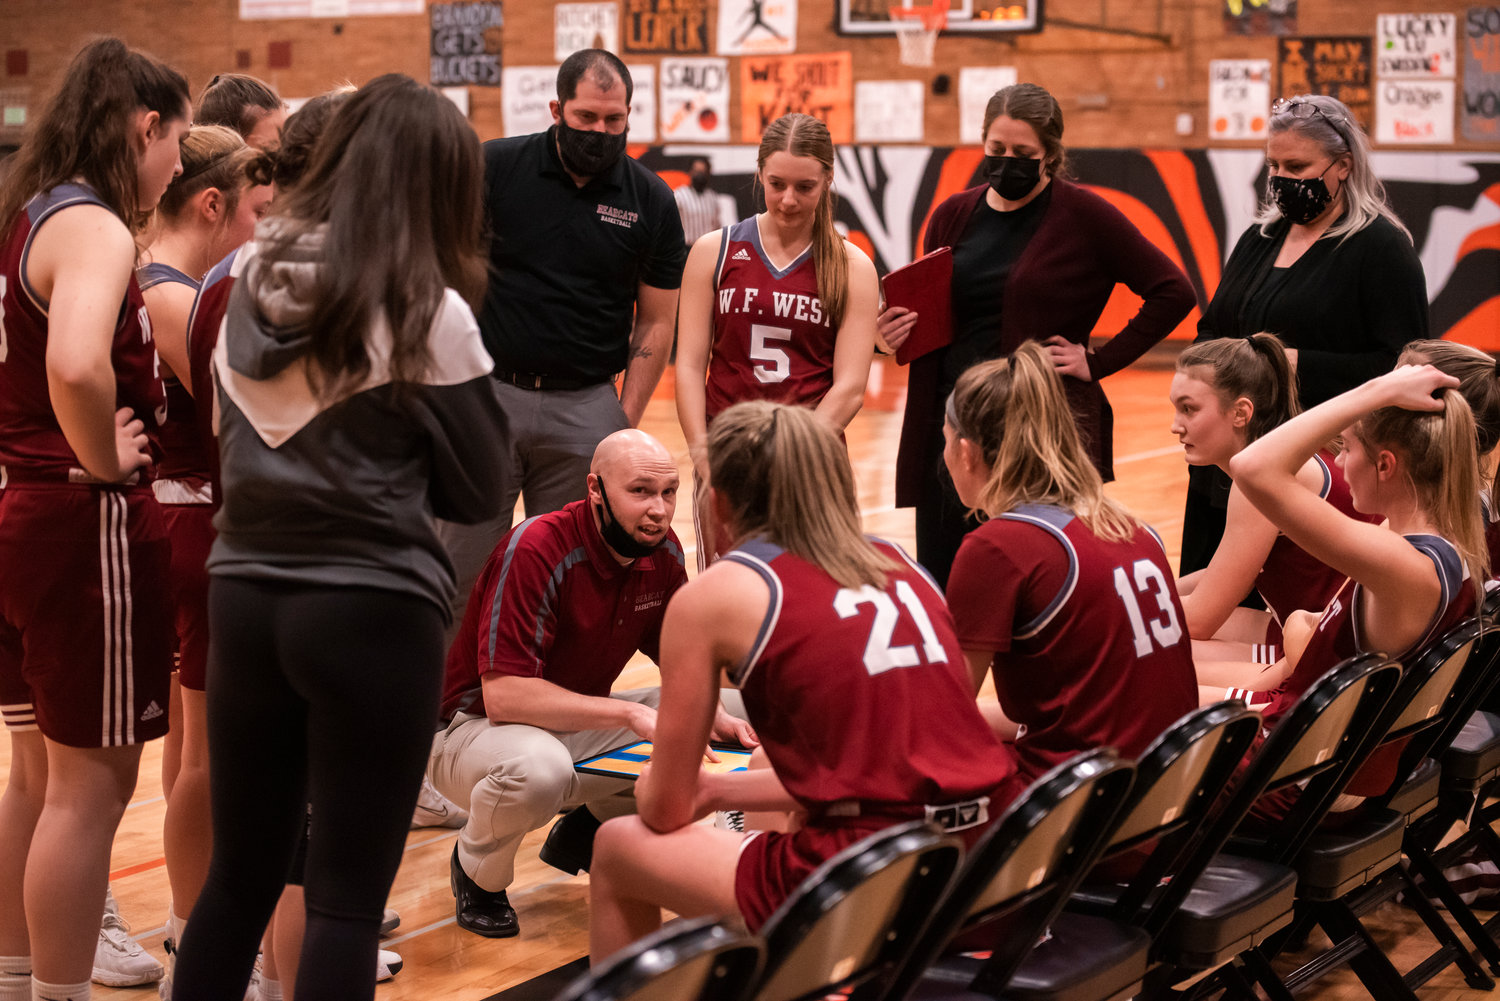 W.F. West Girls Basketball Head Coach Kyle Karnofski talks with players Tuesday night during a Swamp Cup rivalry game in Centralia.